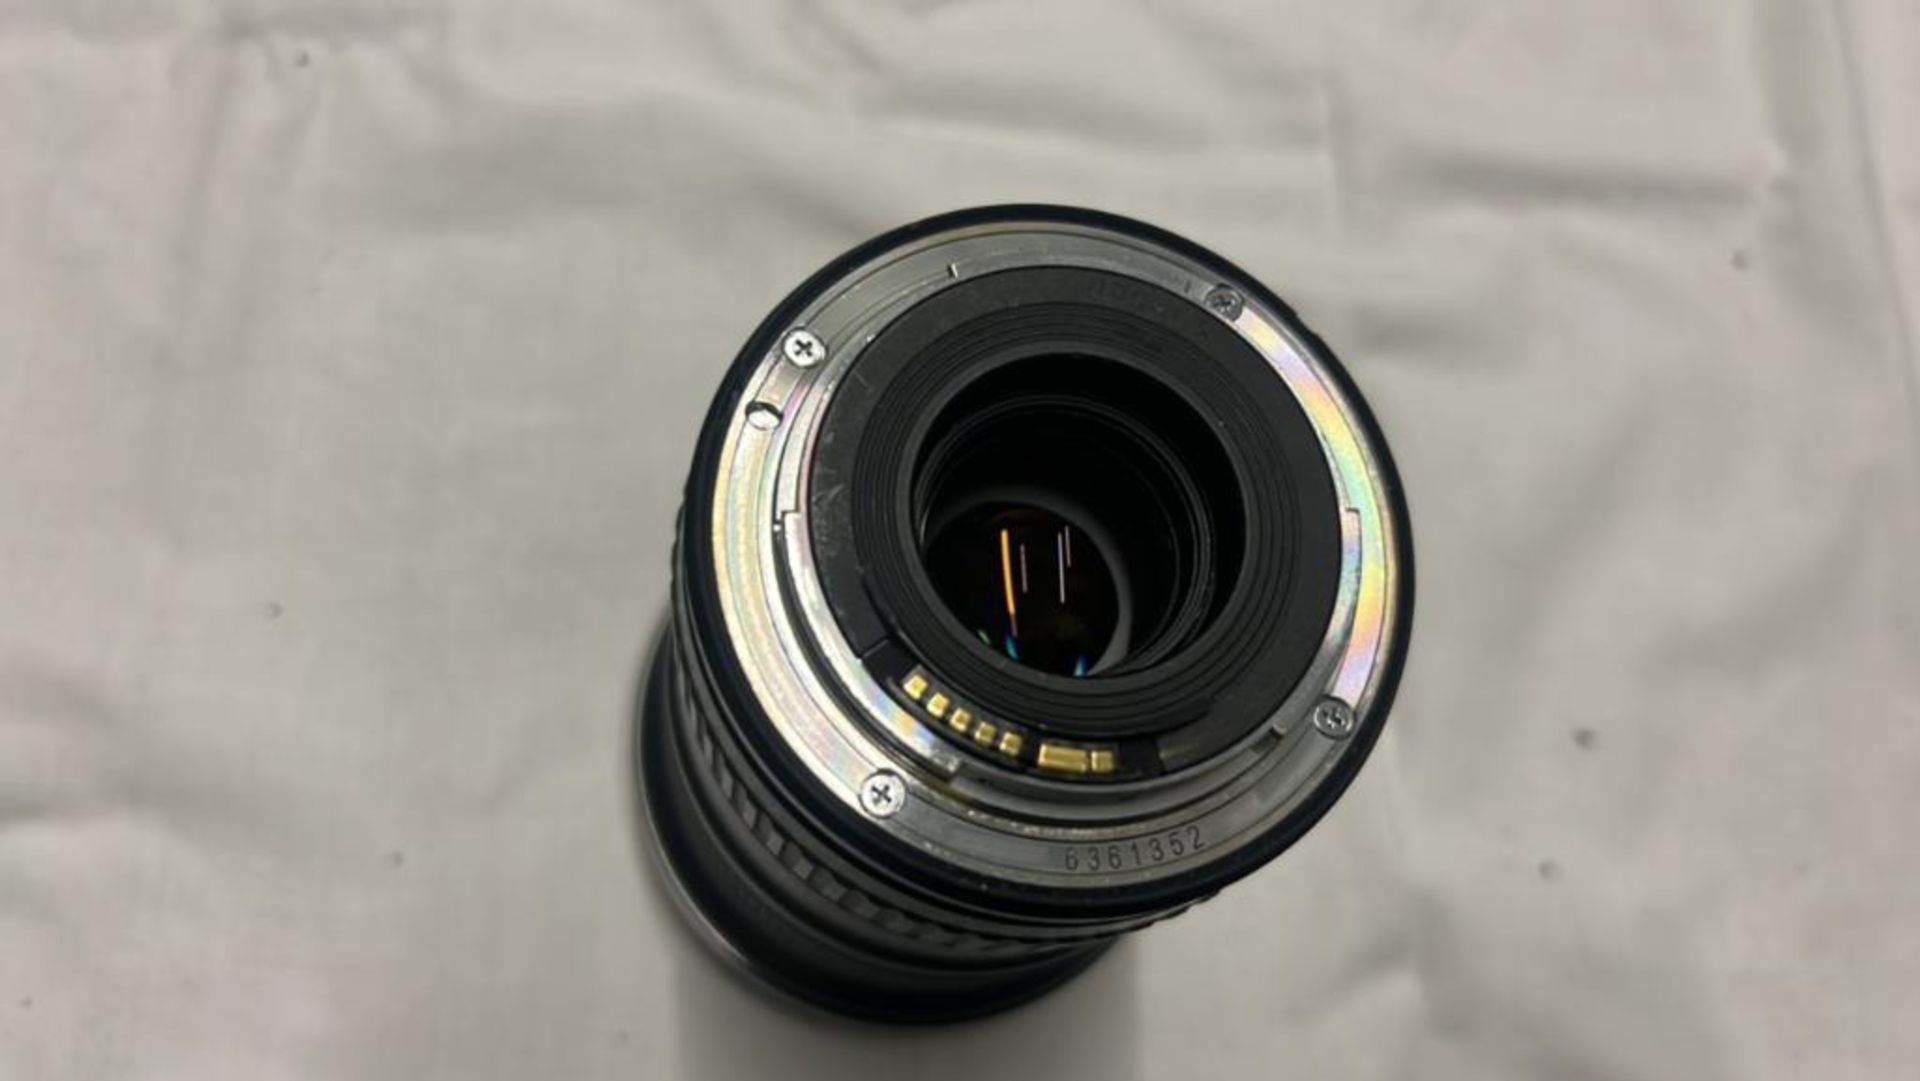 Canon EF 16-35mm f/2.8L II USM Lens with Peli Case Canon SN: 6361352 - Image 4 of 4